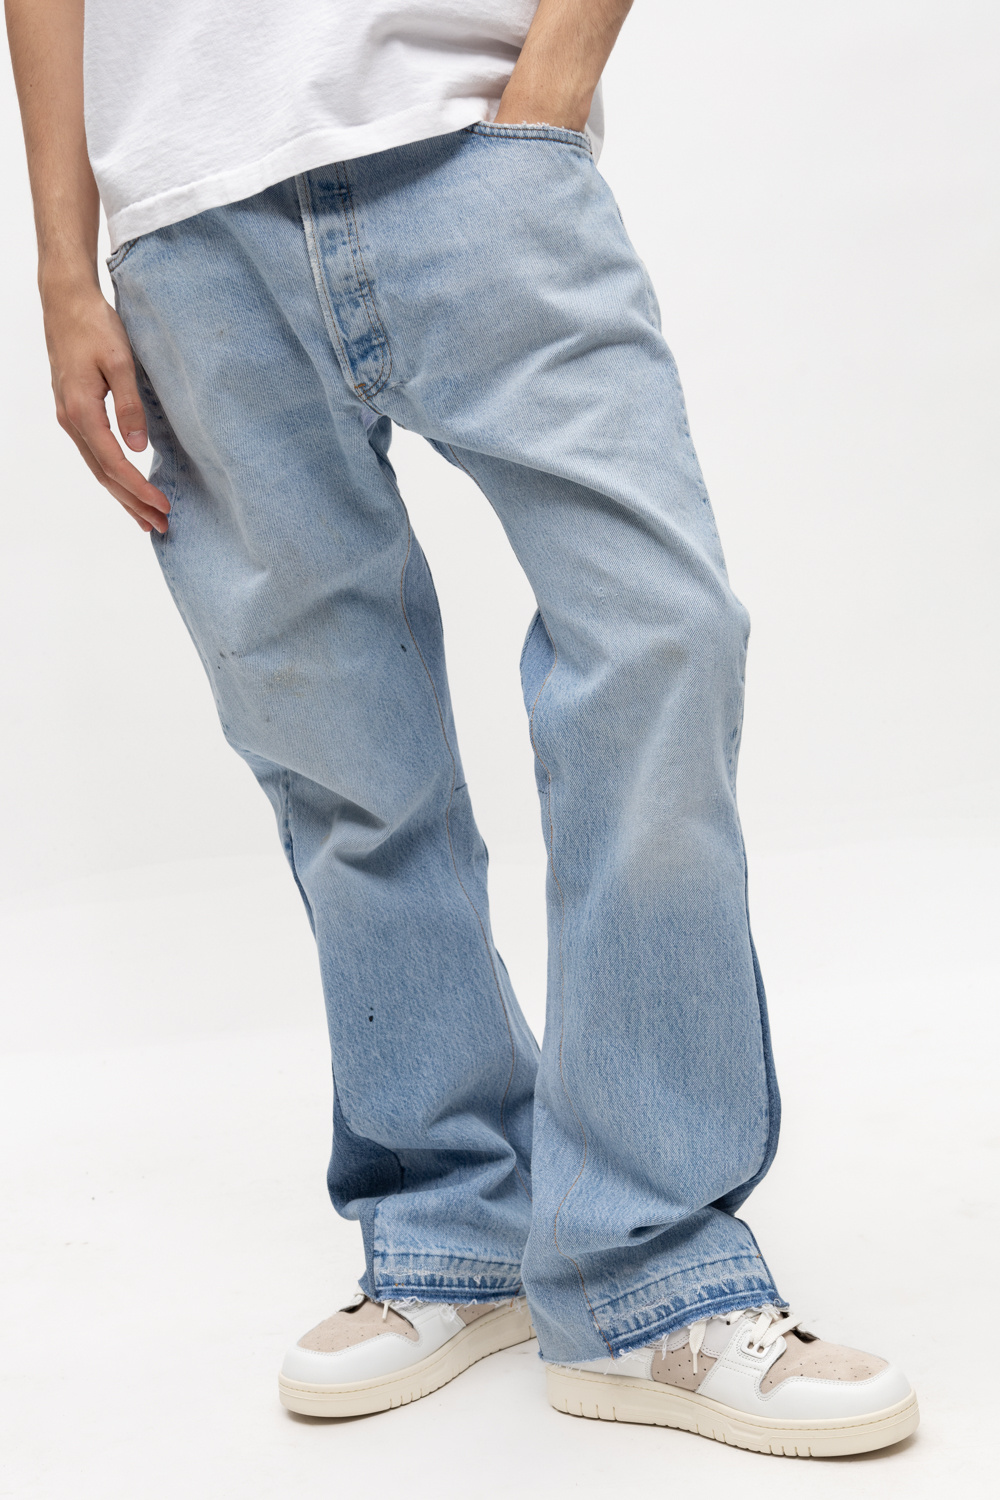 GALLERY DEPT. Jeans with logo | Men's Clothing | Vitkac